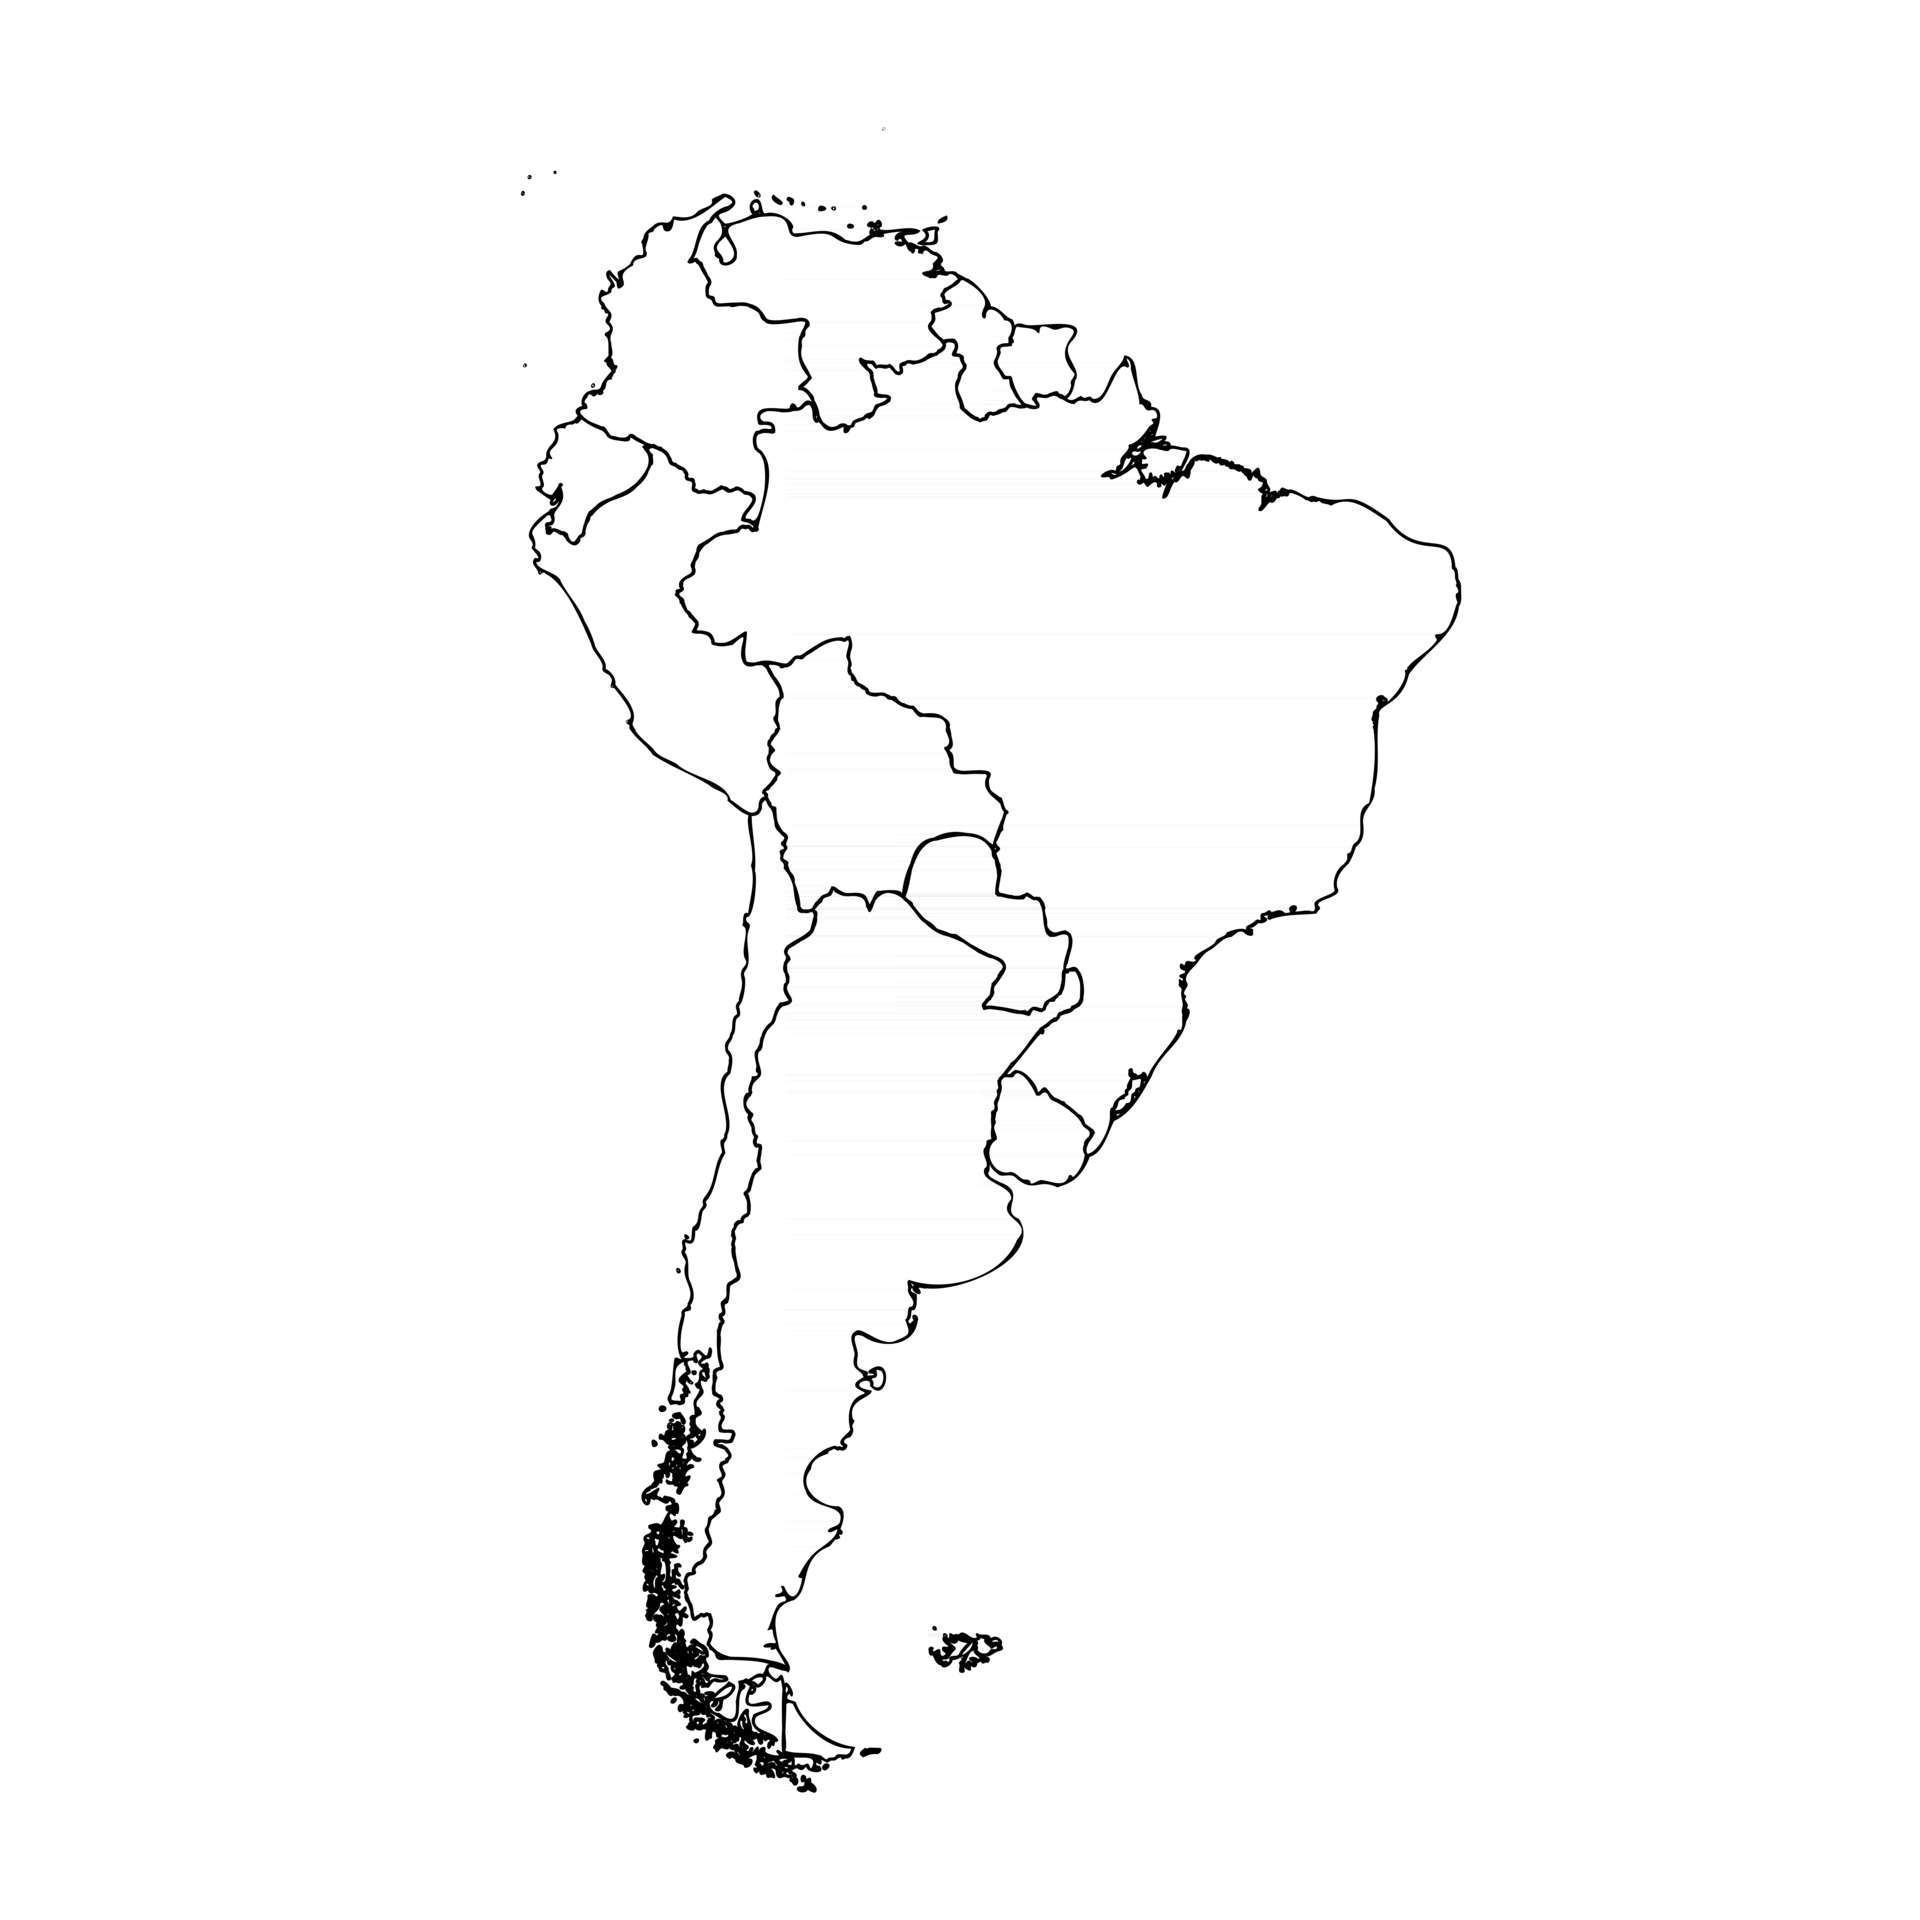 doodle-map-of-south-america-with-countries-2549169-vector-art-at-vecteezy